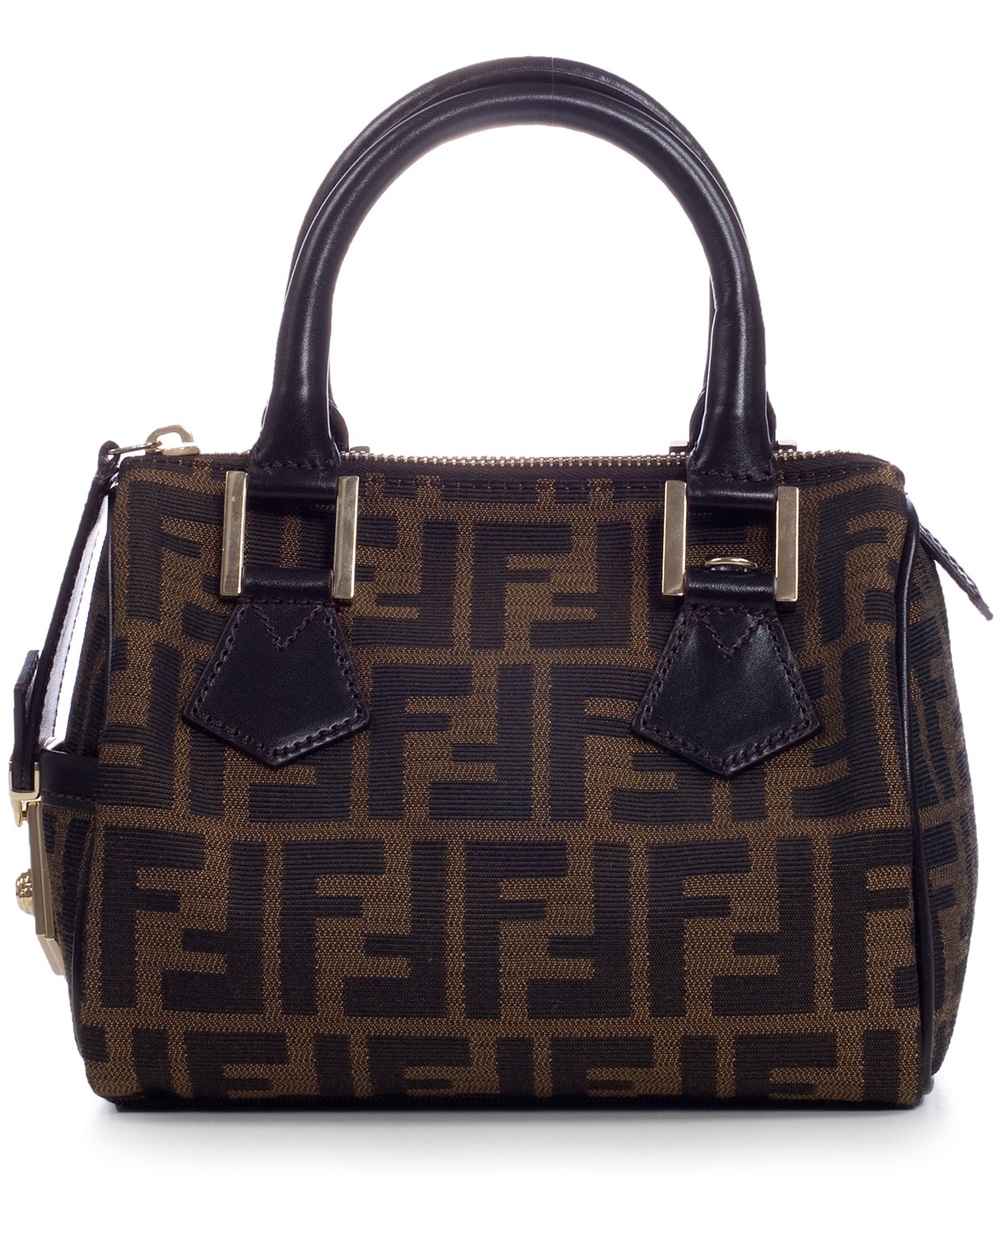 Fendi Canvas and Leather Bag in Brown | Lyst